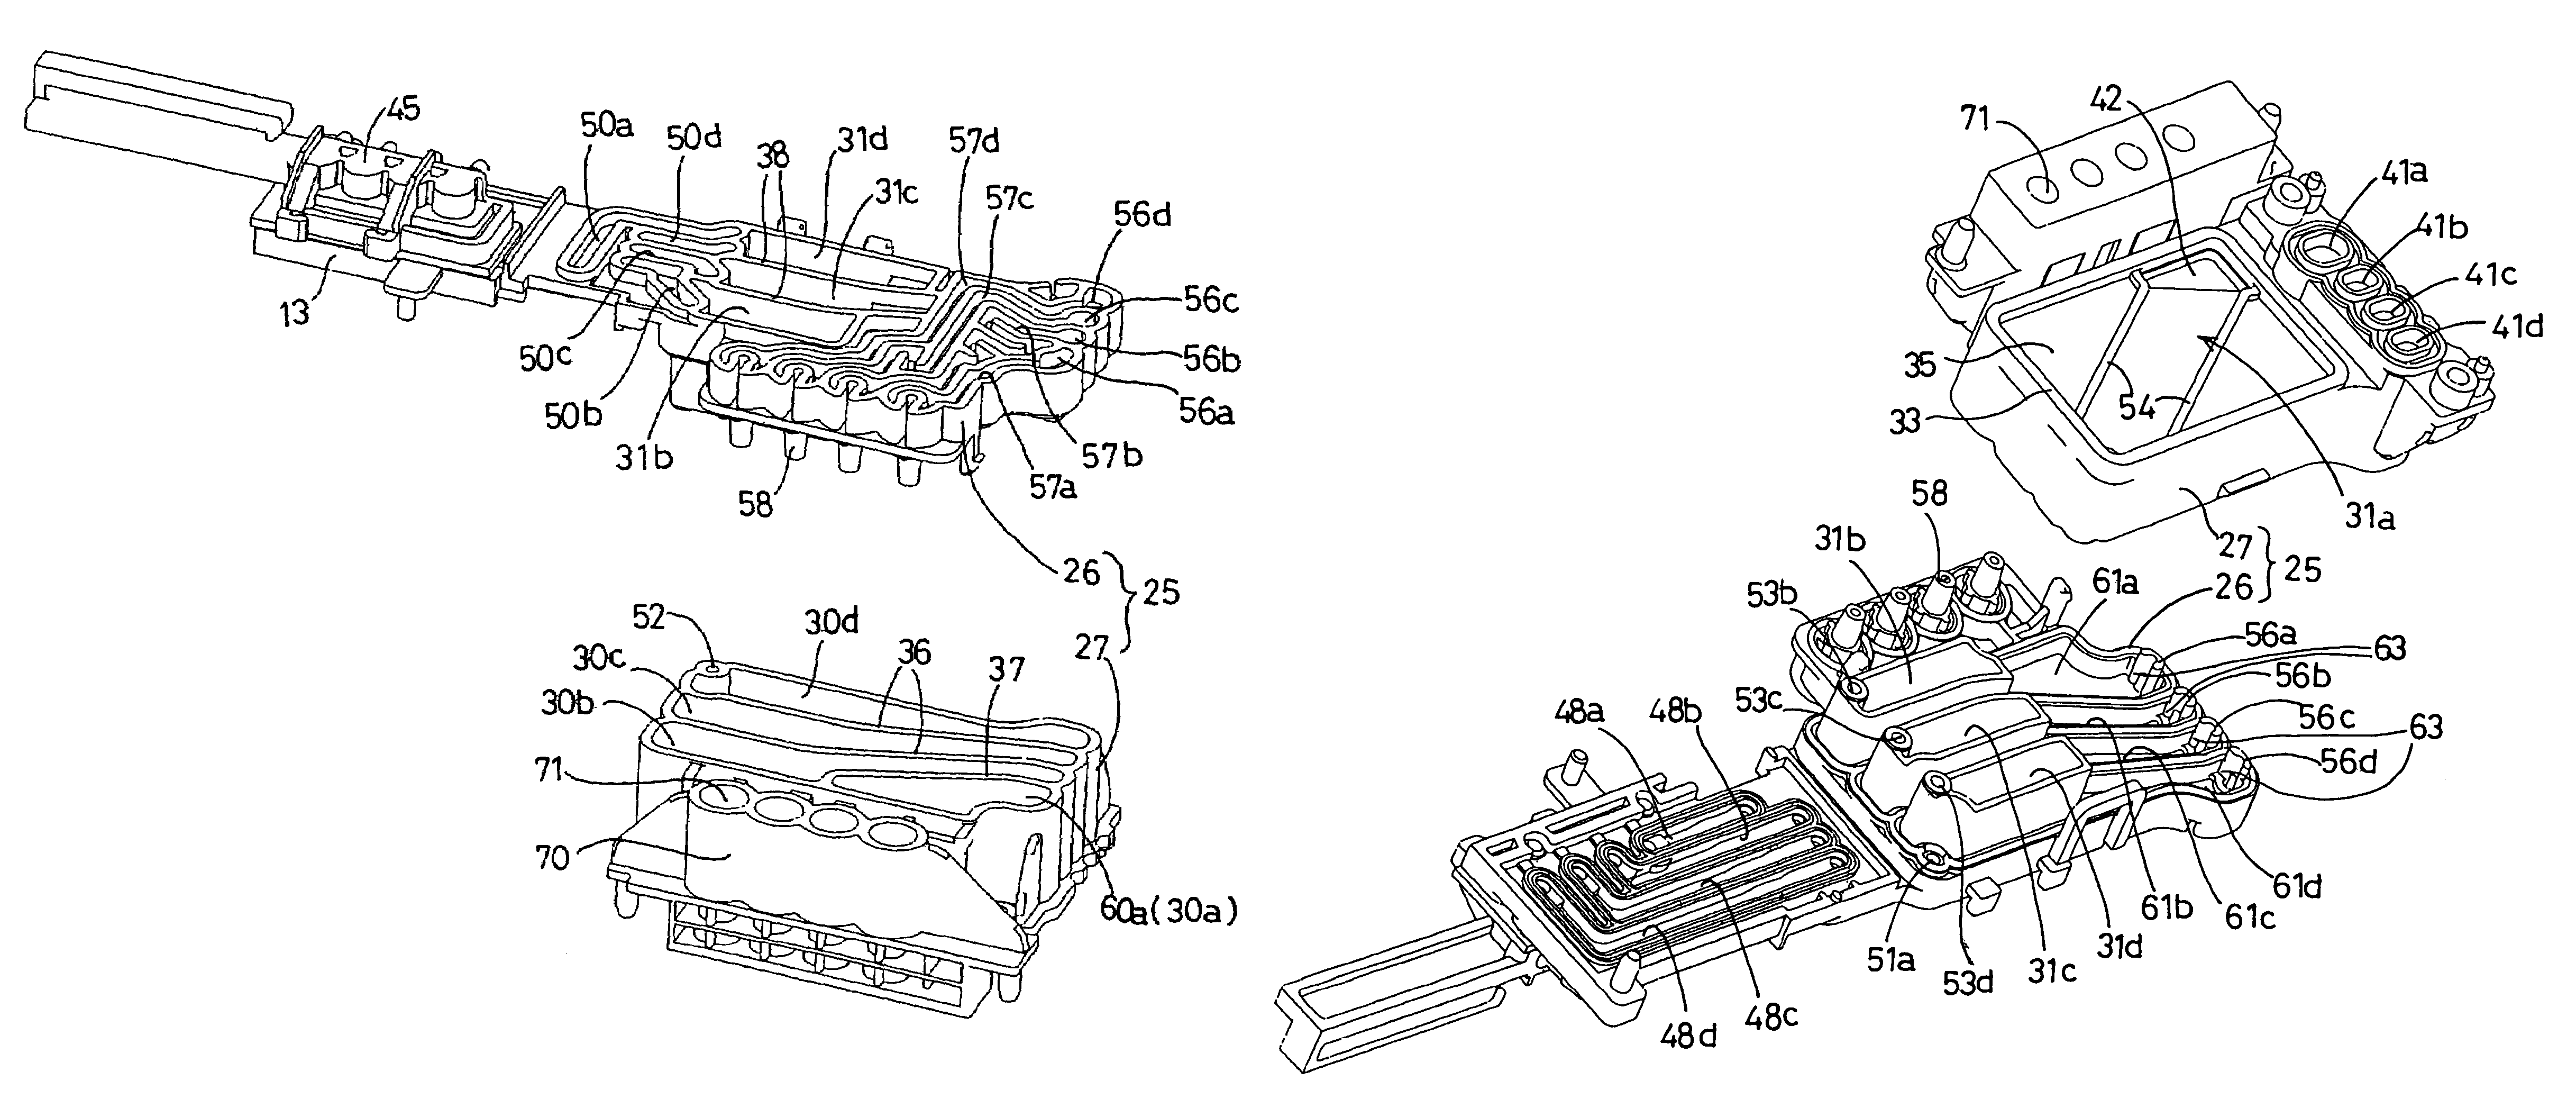 Inkjet printer with delivery chamber